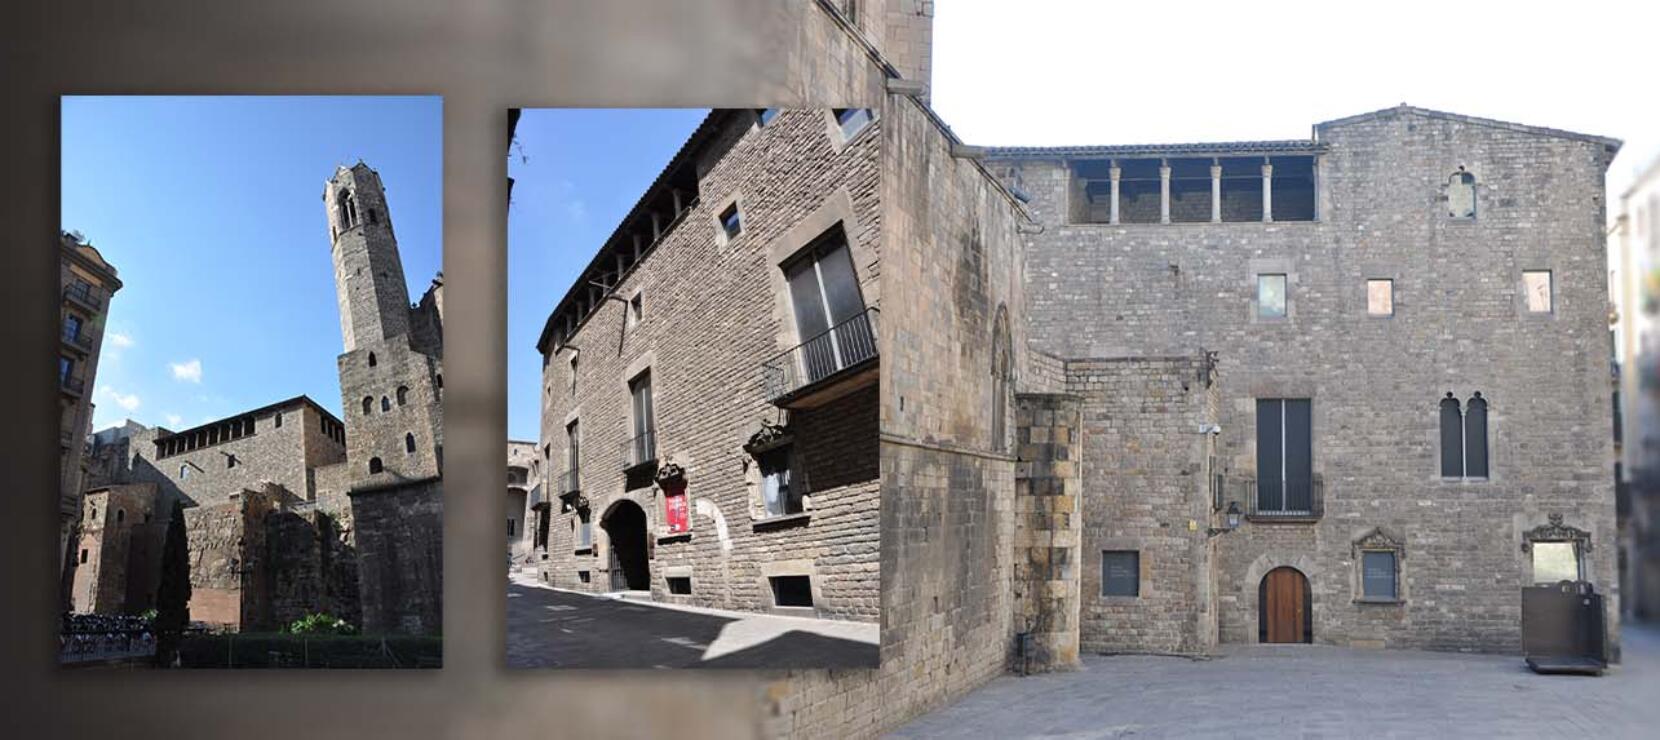 Emblematic Architectural Project Awarded: XV Century Palace in Barcelona